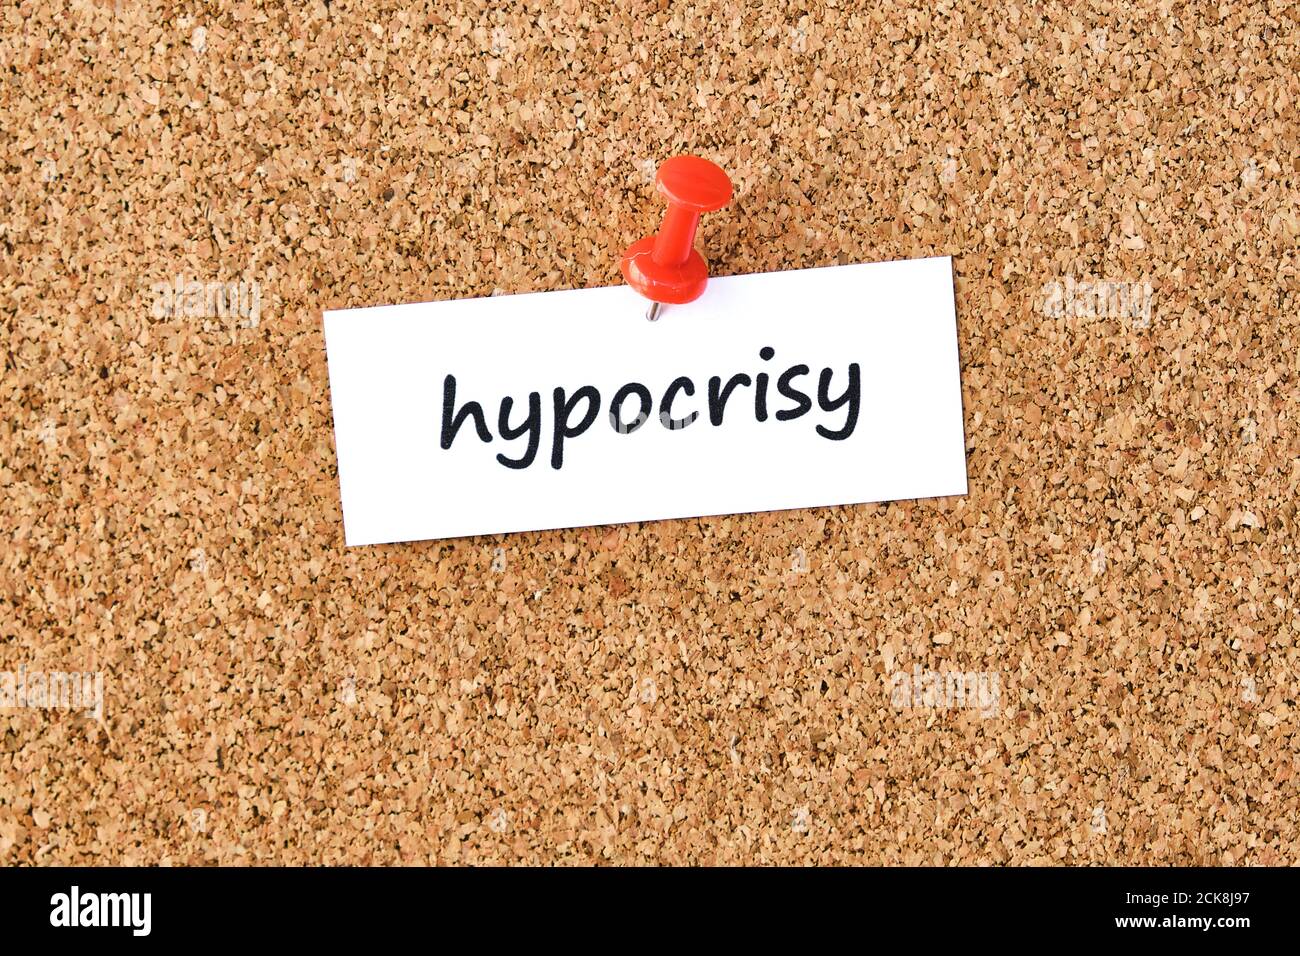 Hypocrisy. Word written on a piece of paper or note, cork board background. Stock Photo